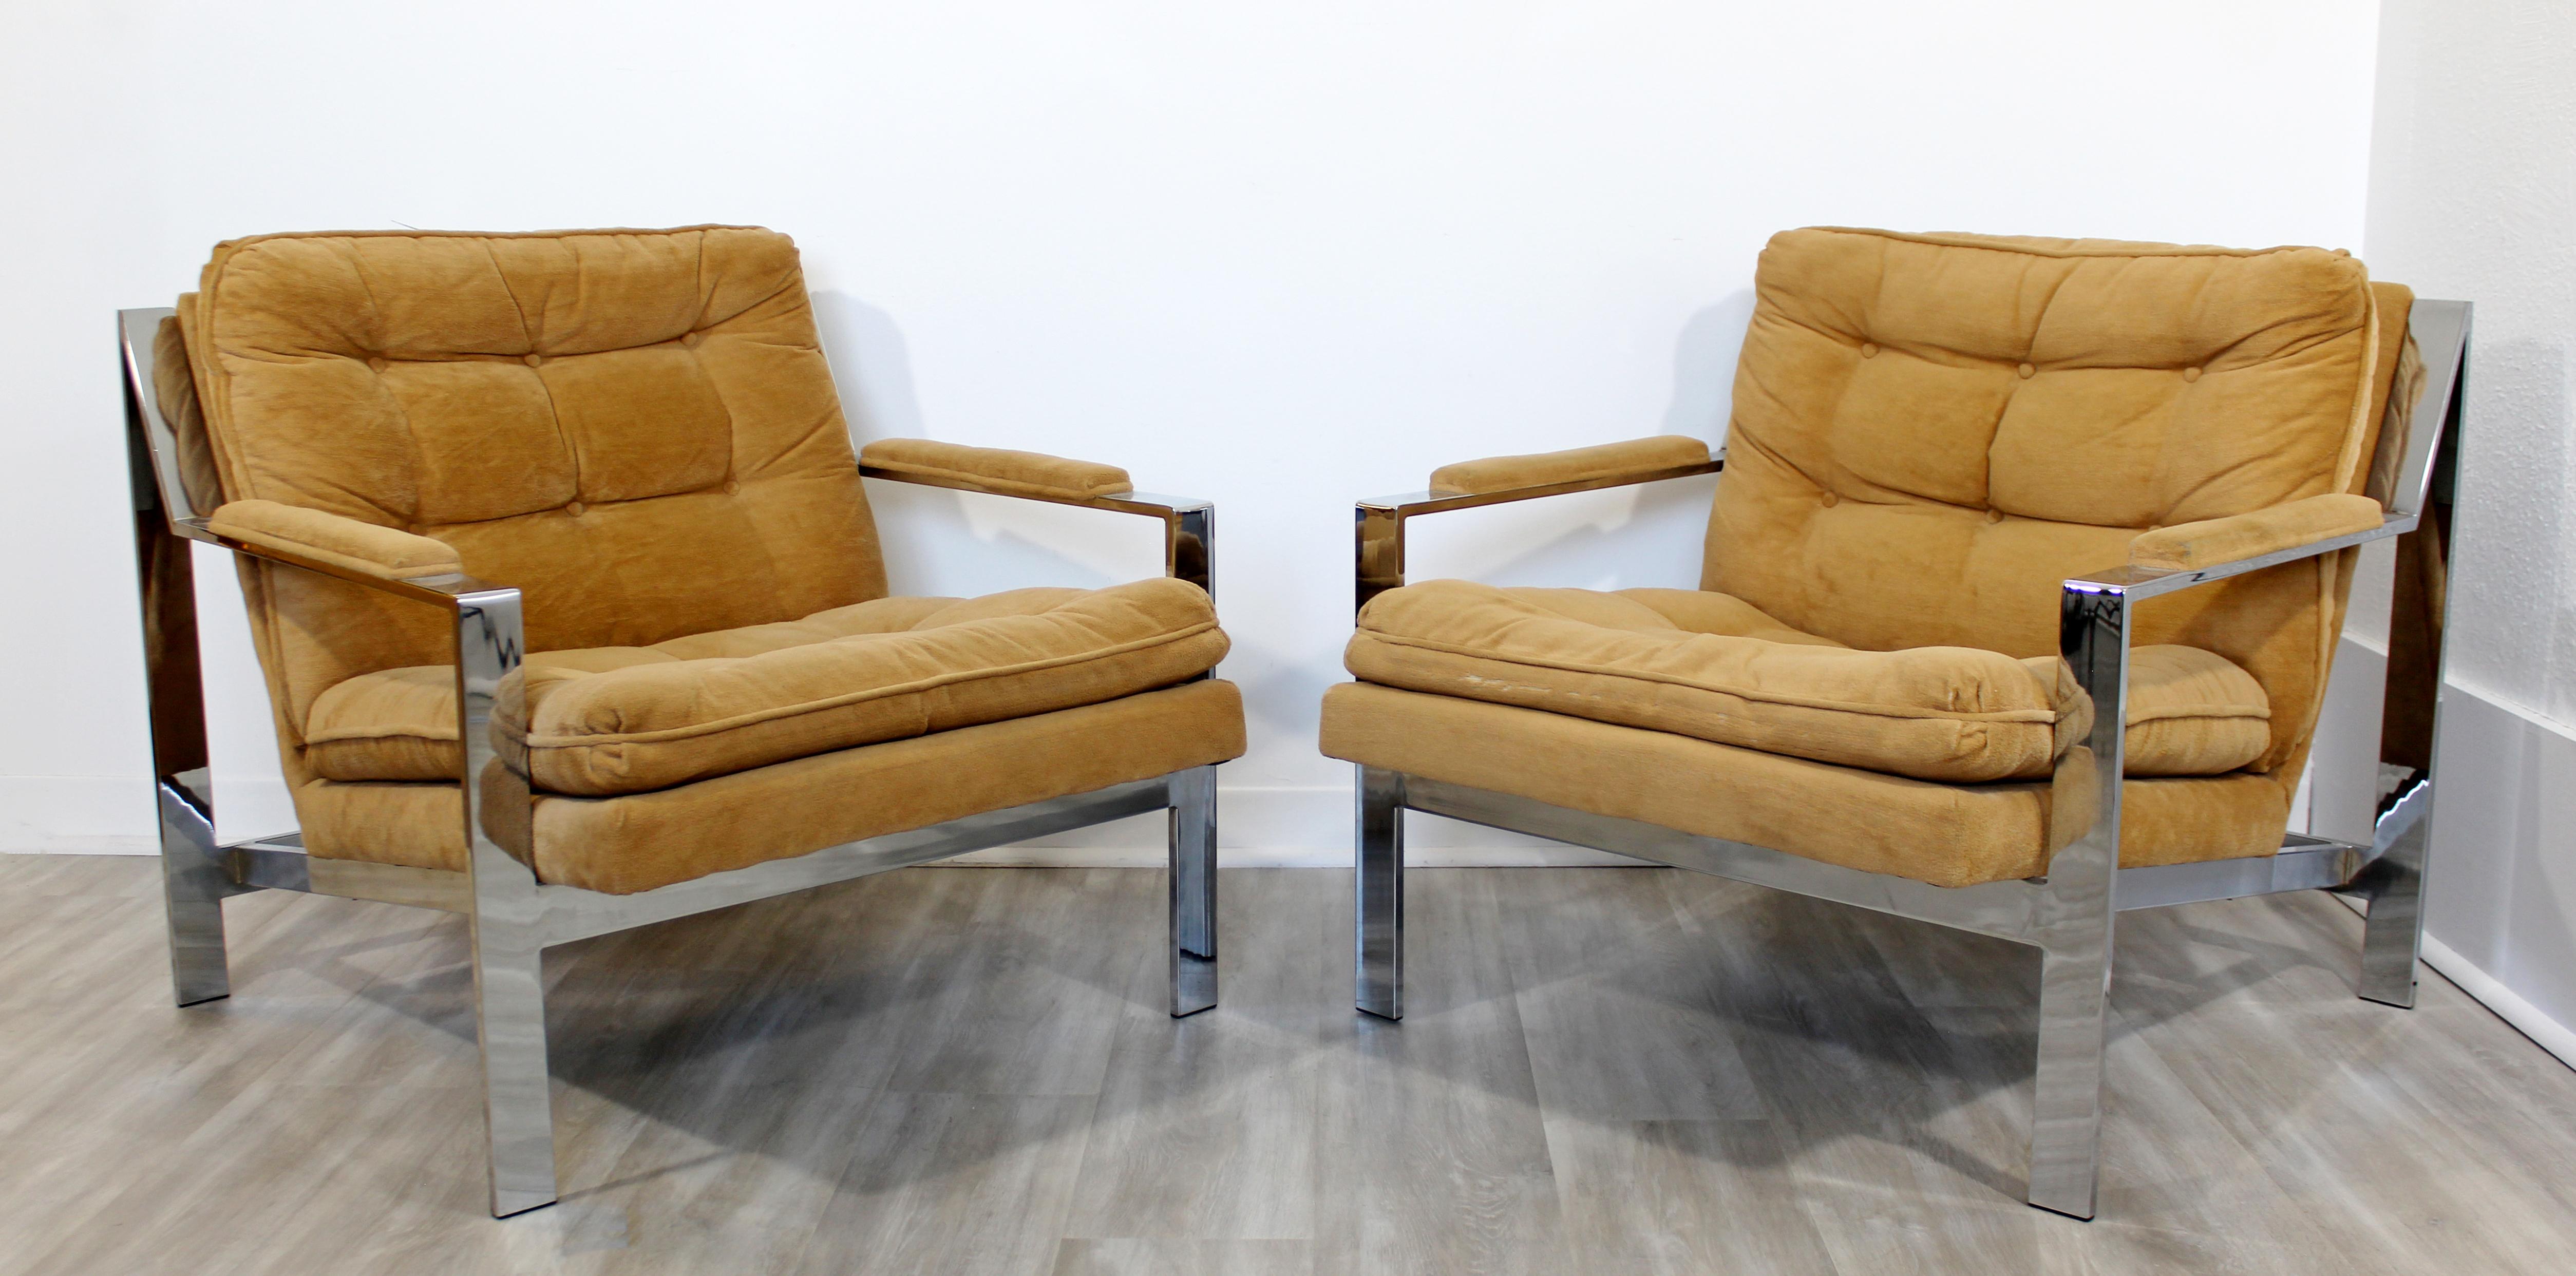 For your consideration is a spectacular pair of flat bar chrome lounge chairs, by Cy Mann, in the style of Milo Baughman, circa 1960s. In very good vintage condition. The dimensions are 29